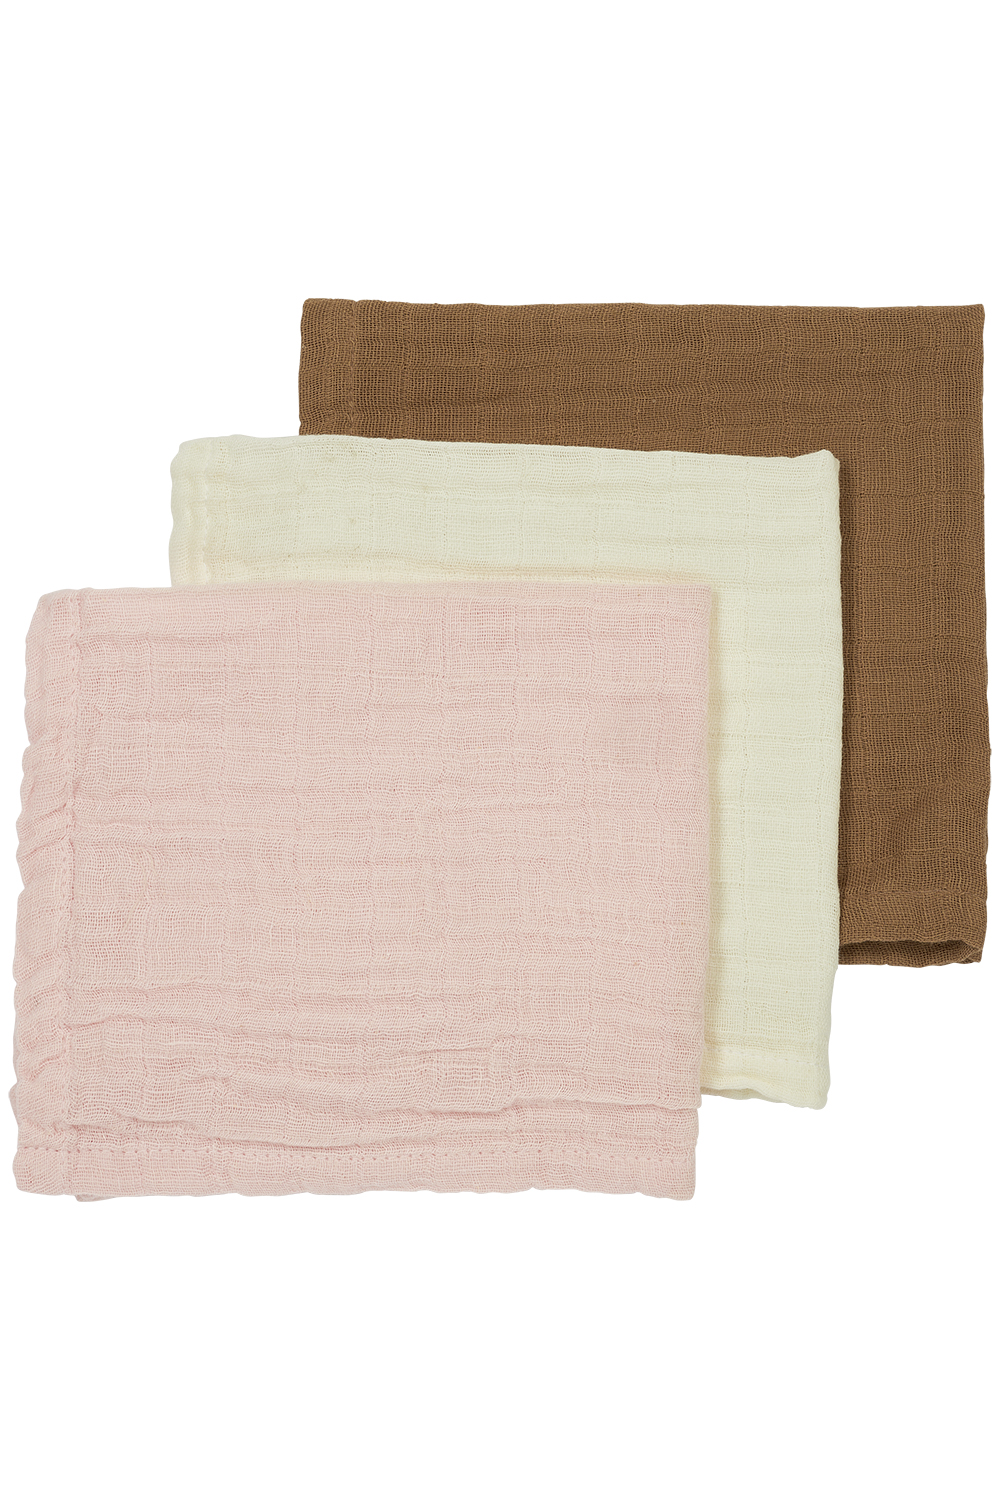 Facecloth 3-pack pre-washed muslin Uni - offwhite/soft pink/toffee - 30x30cm